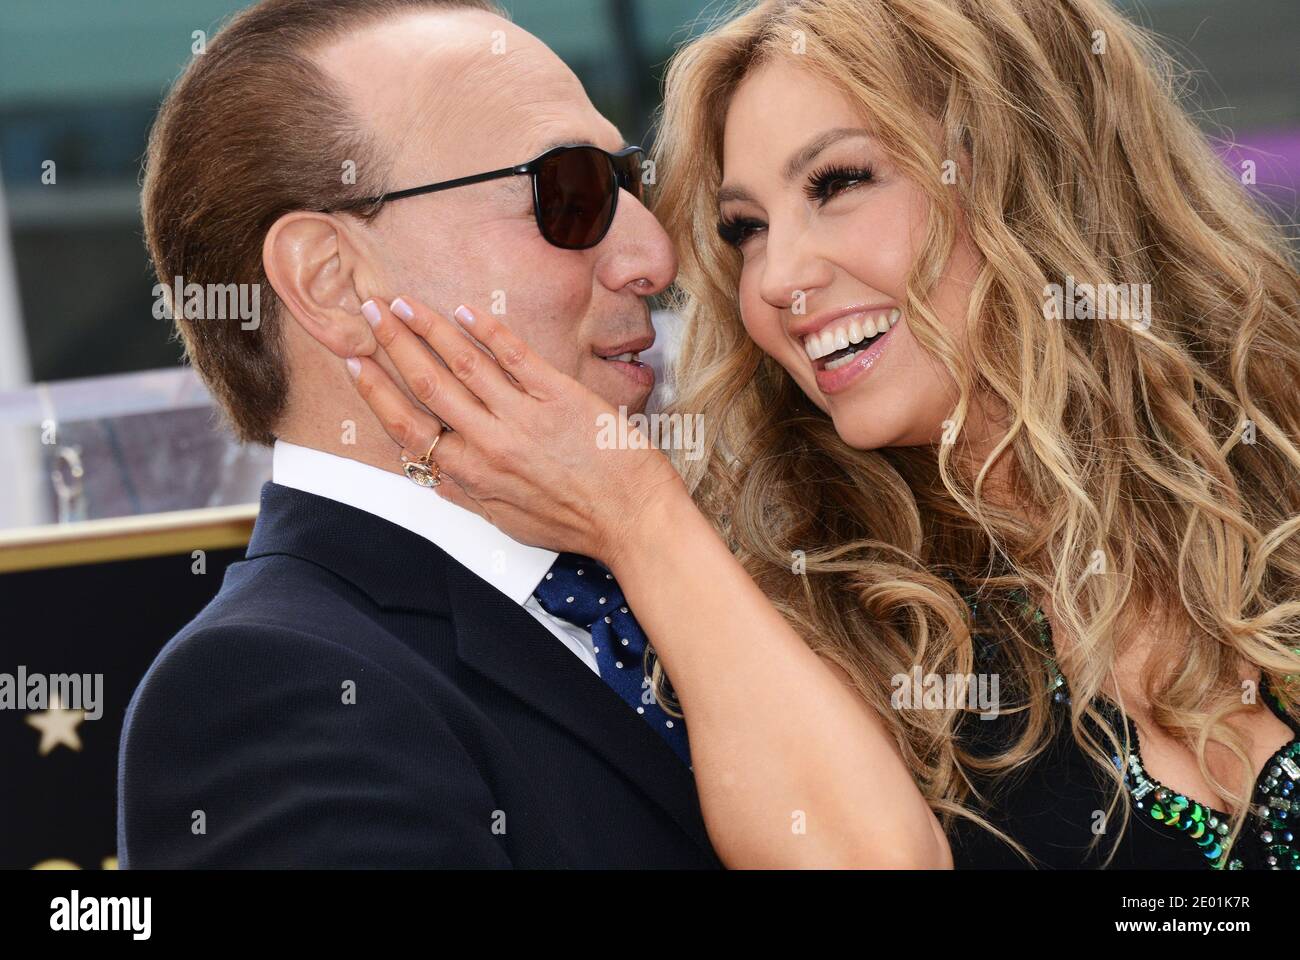 Singer Thalia posing with her husband Tommy Mottola is honored with a star on the Hollywood Walk of Fame in Los Angeles, CA, USA on December 5, 2013. Photo by Lionel Hahn/ABACAPRESS.COM Stock Photo